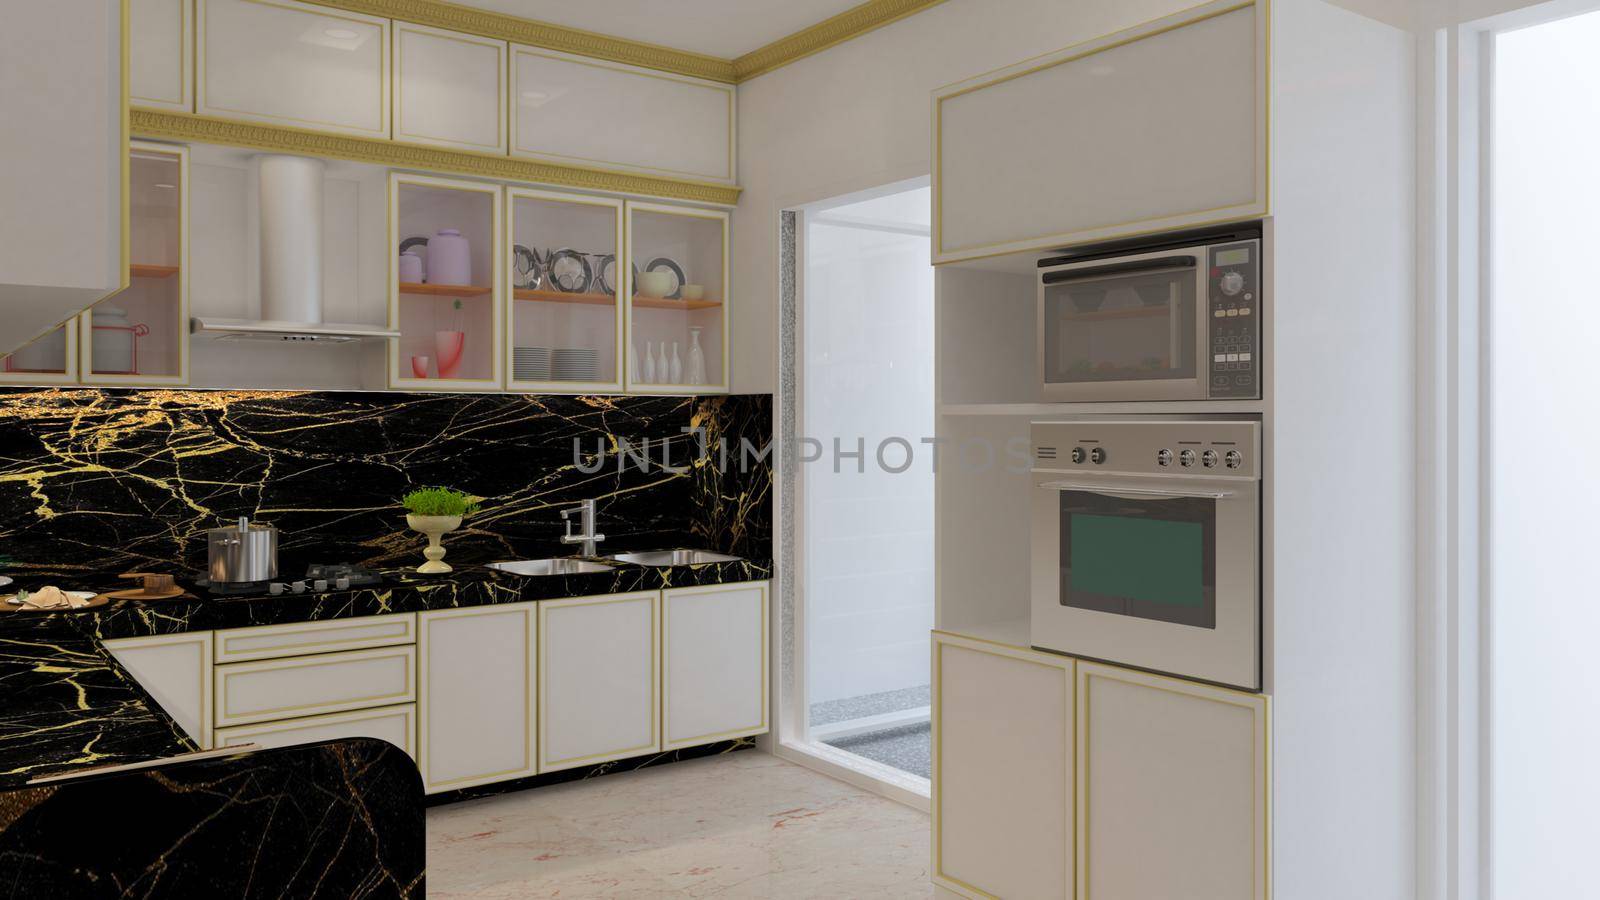 3d render Illustration classic style kitchen. white, black and gold theme classic kitchen.